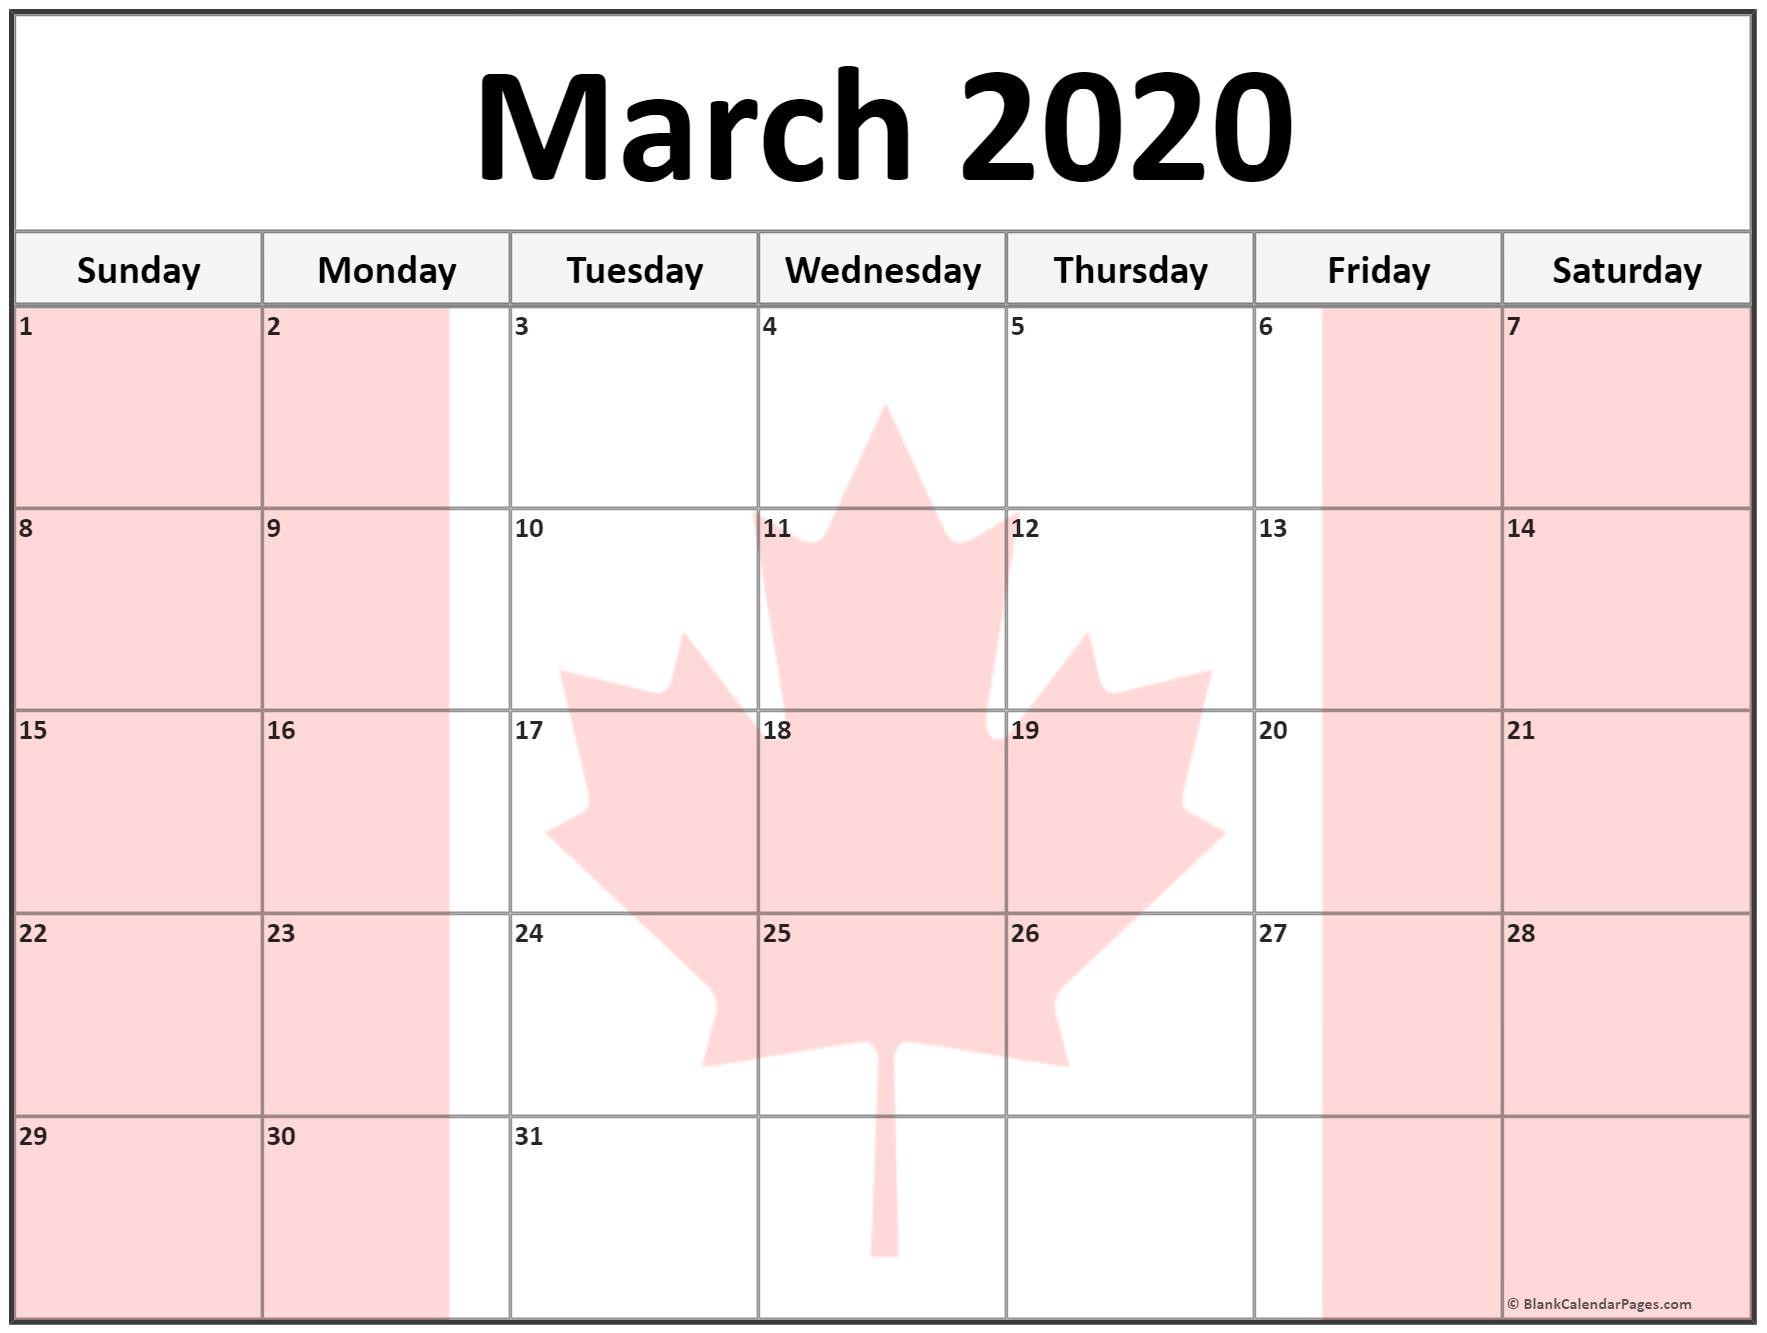 collection of march 2020 photo calendars with image filters